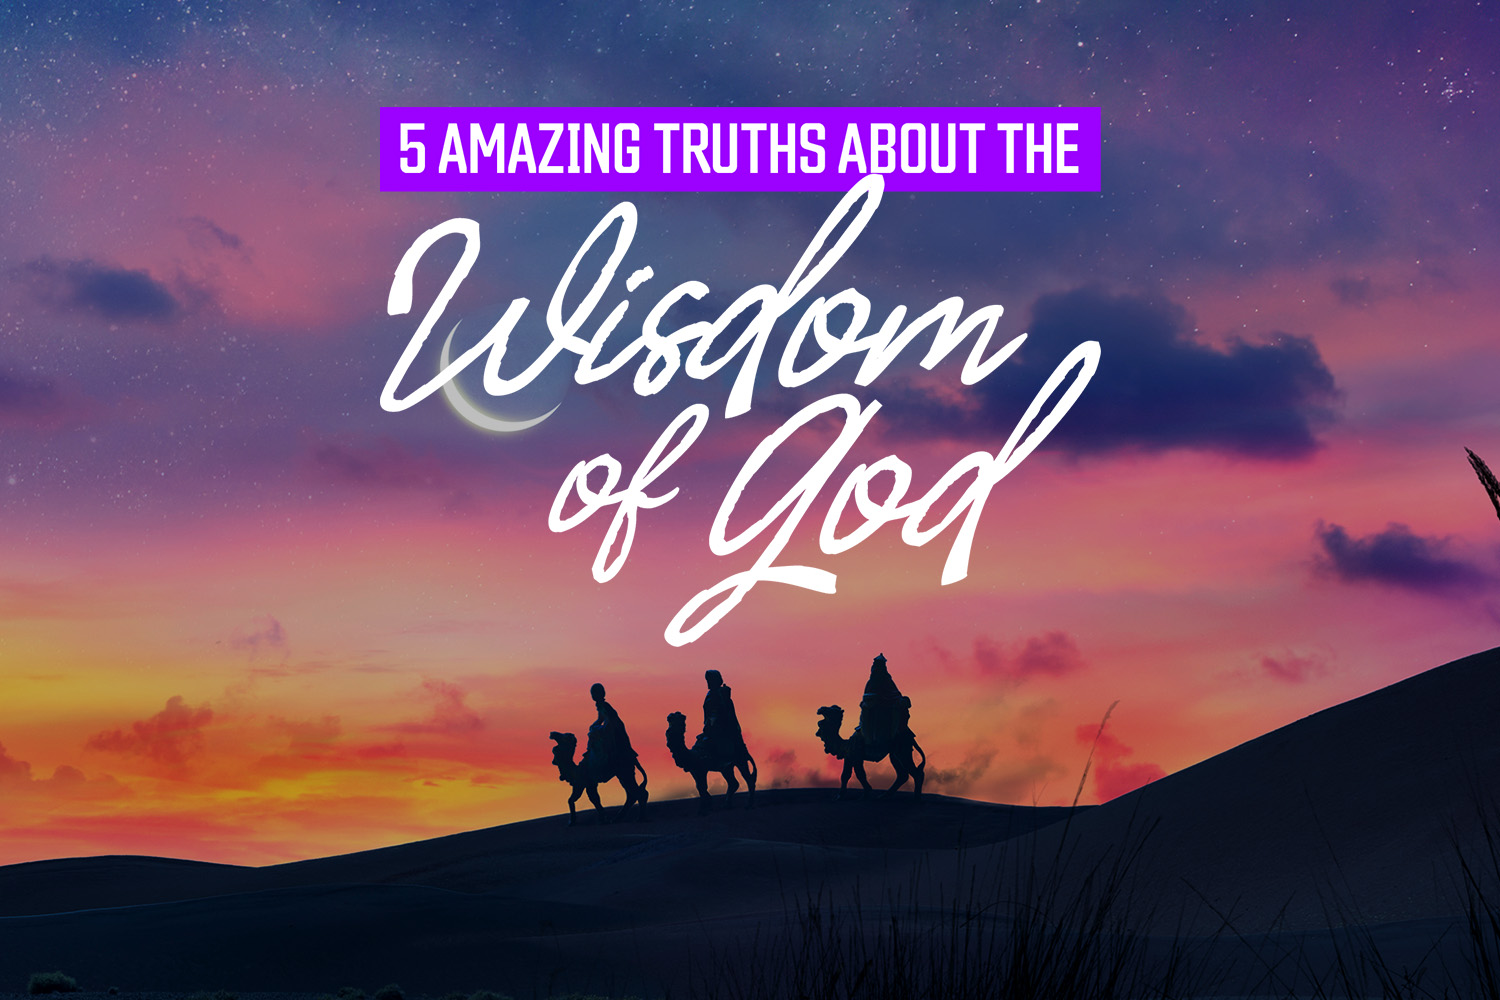 5 Amazing Truths About the Wisdom of God